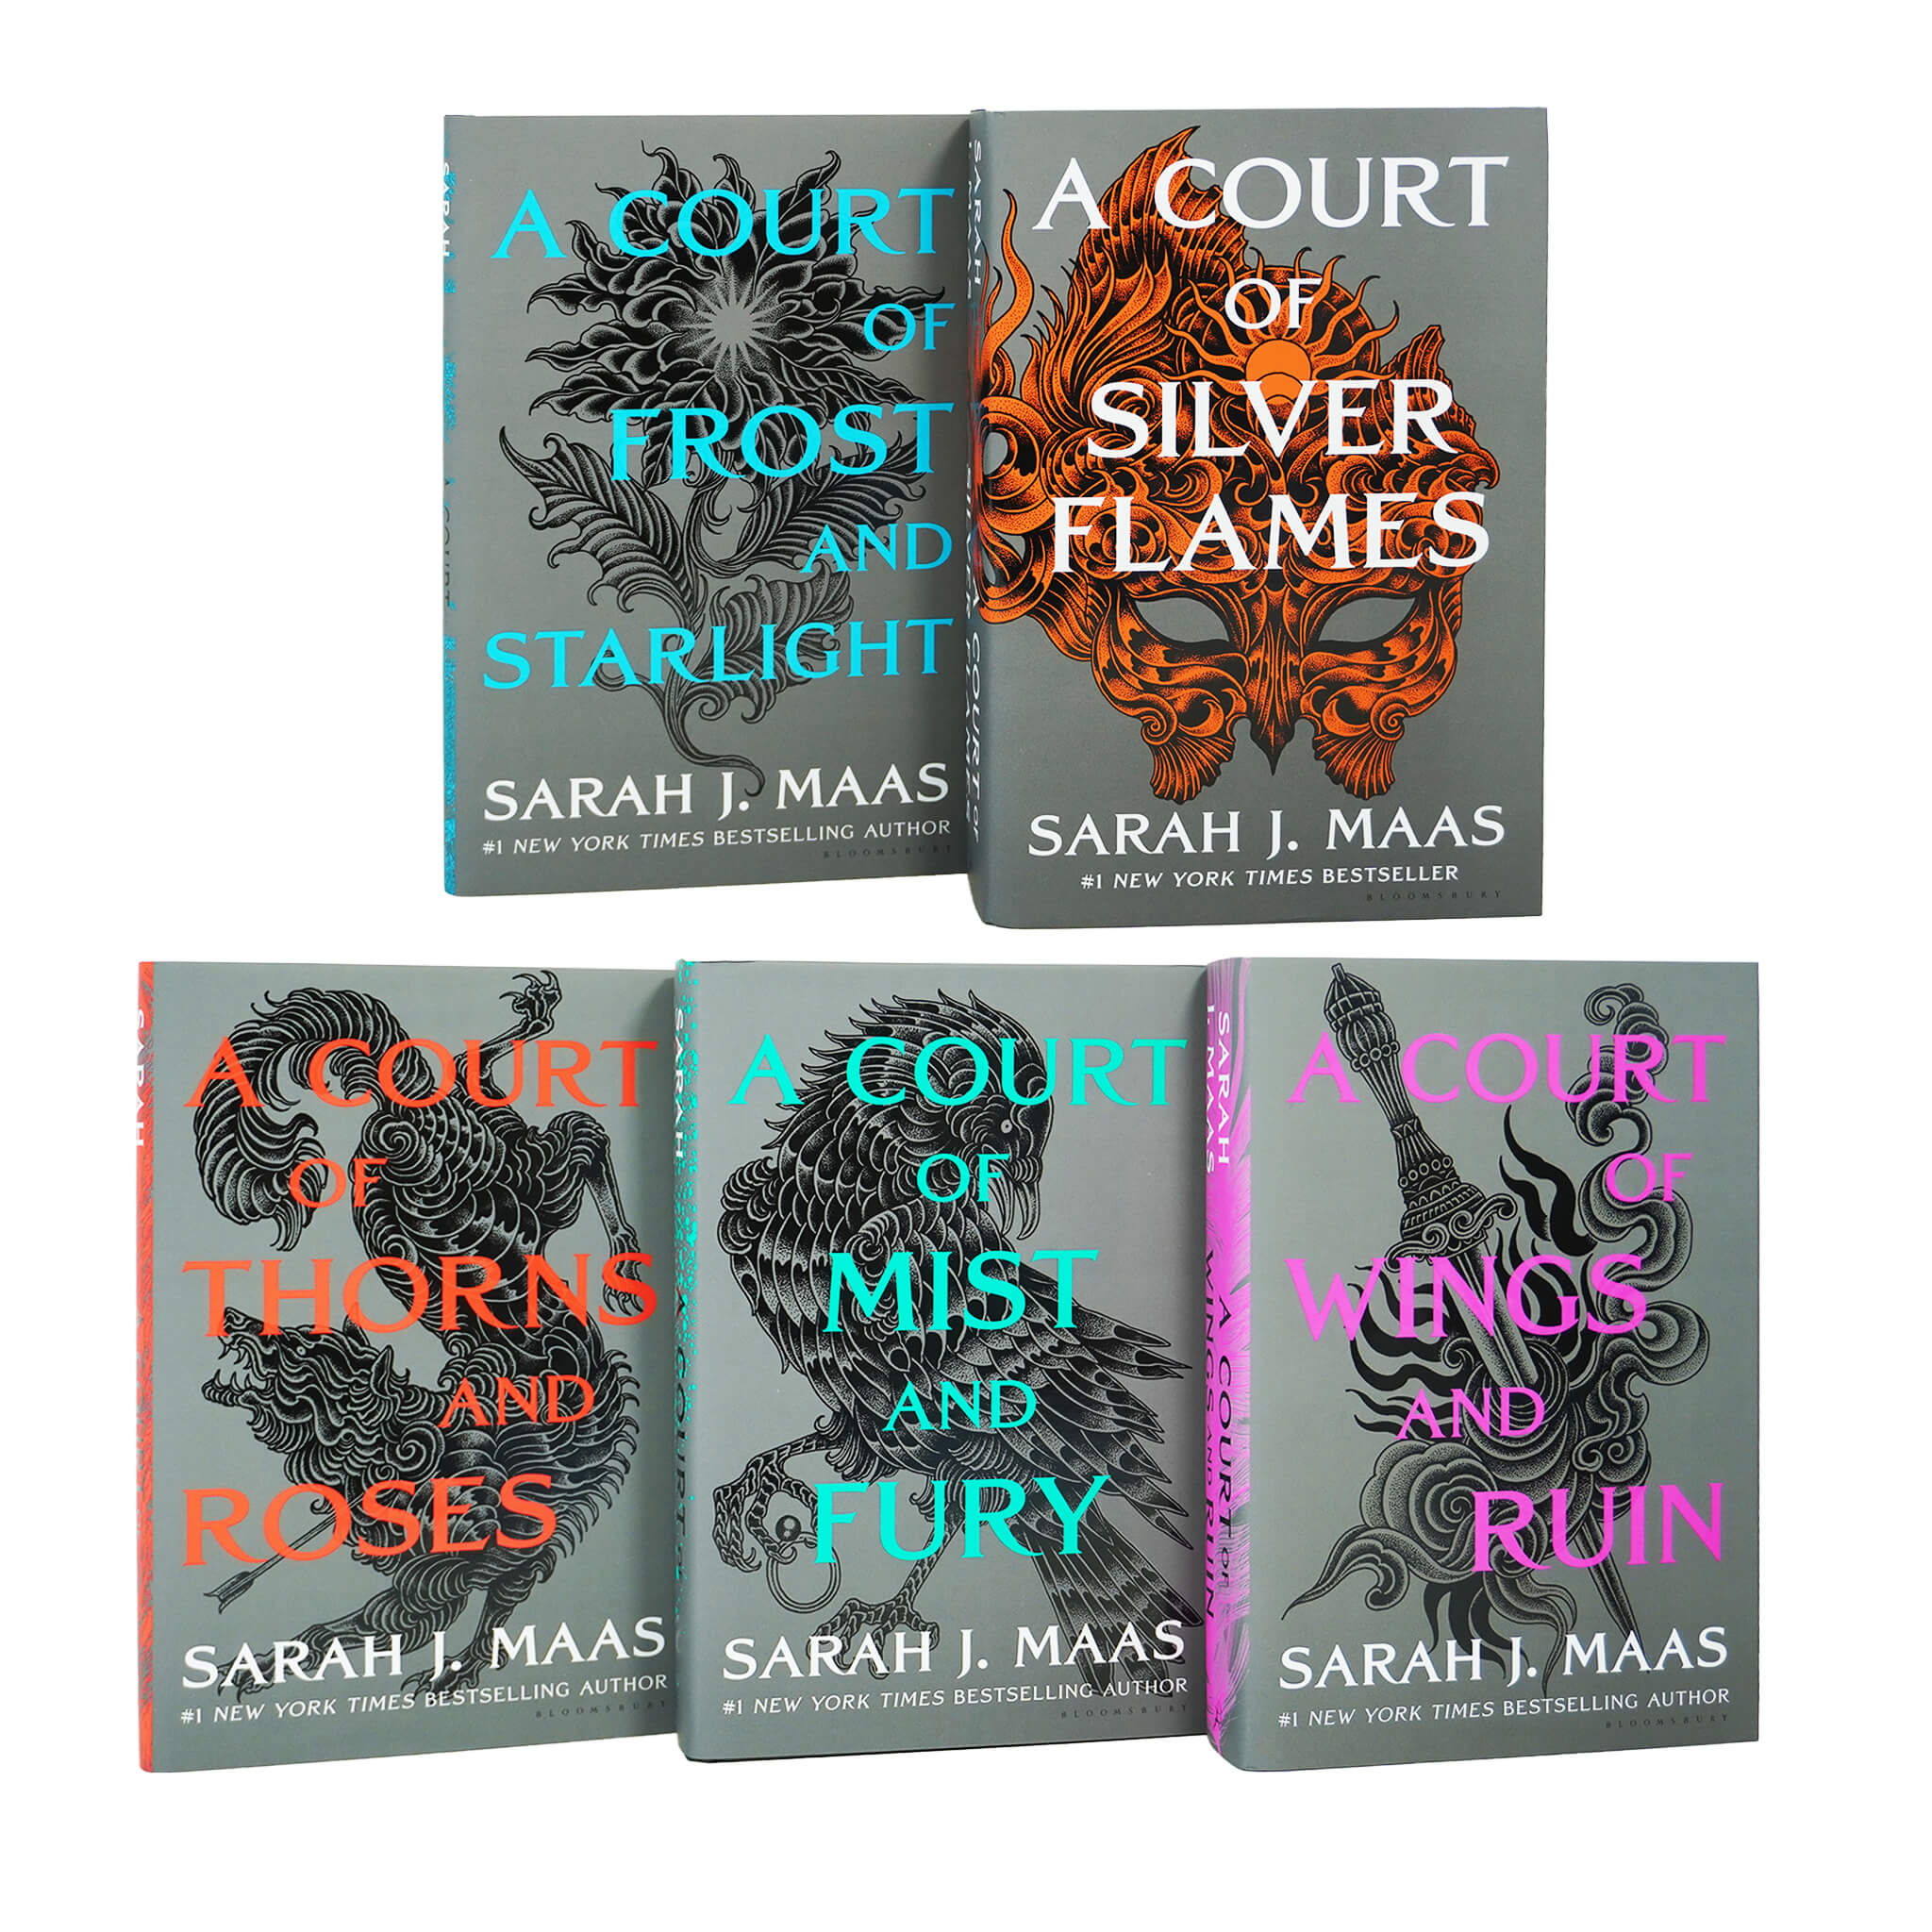 Victoria Aveyard Red Queen Series 5 Books Collection Set -Young Adult  -Paperback